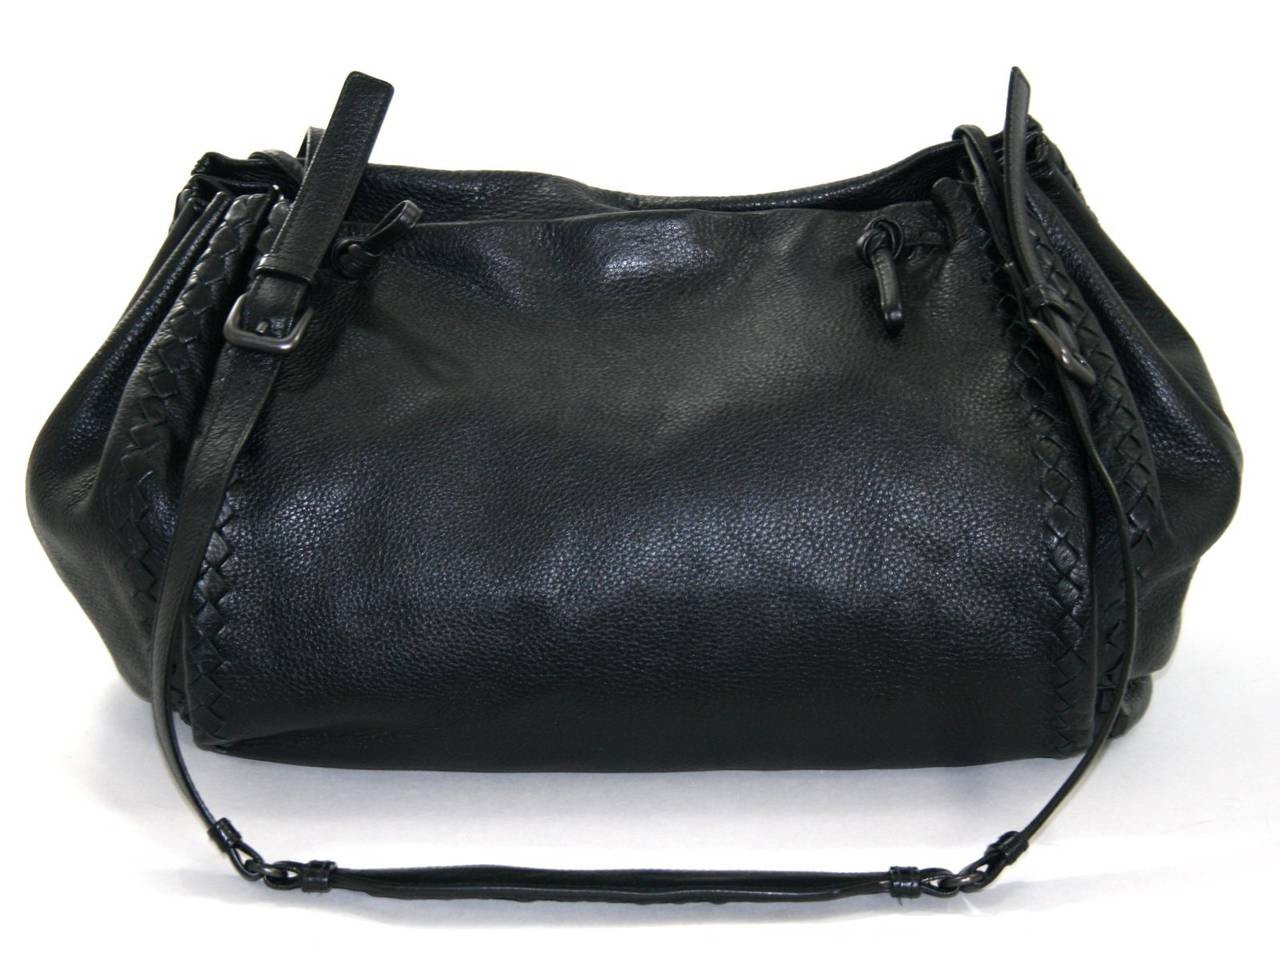 Bottega Veneta’s Black Cervo Messenger Bag is a fantastic find for a smart shopper.  It is in great overall condition.  The exterior looks excellent with just a bit of normal wrinkling.  The interior looks very good; there is a large pen mark on the